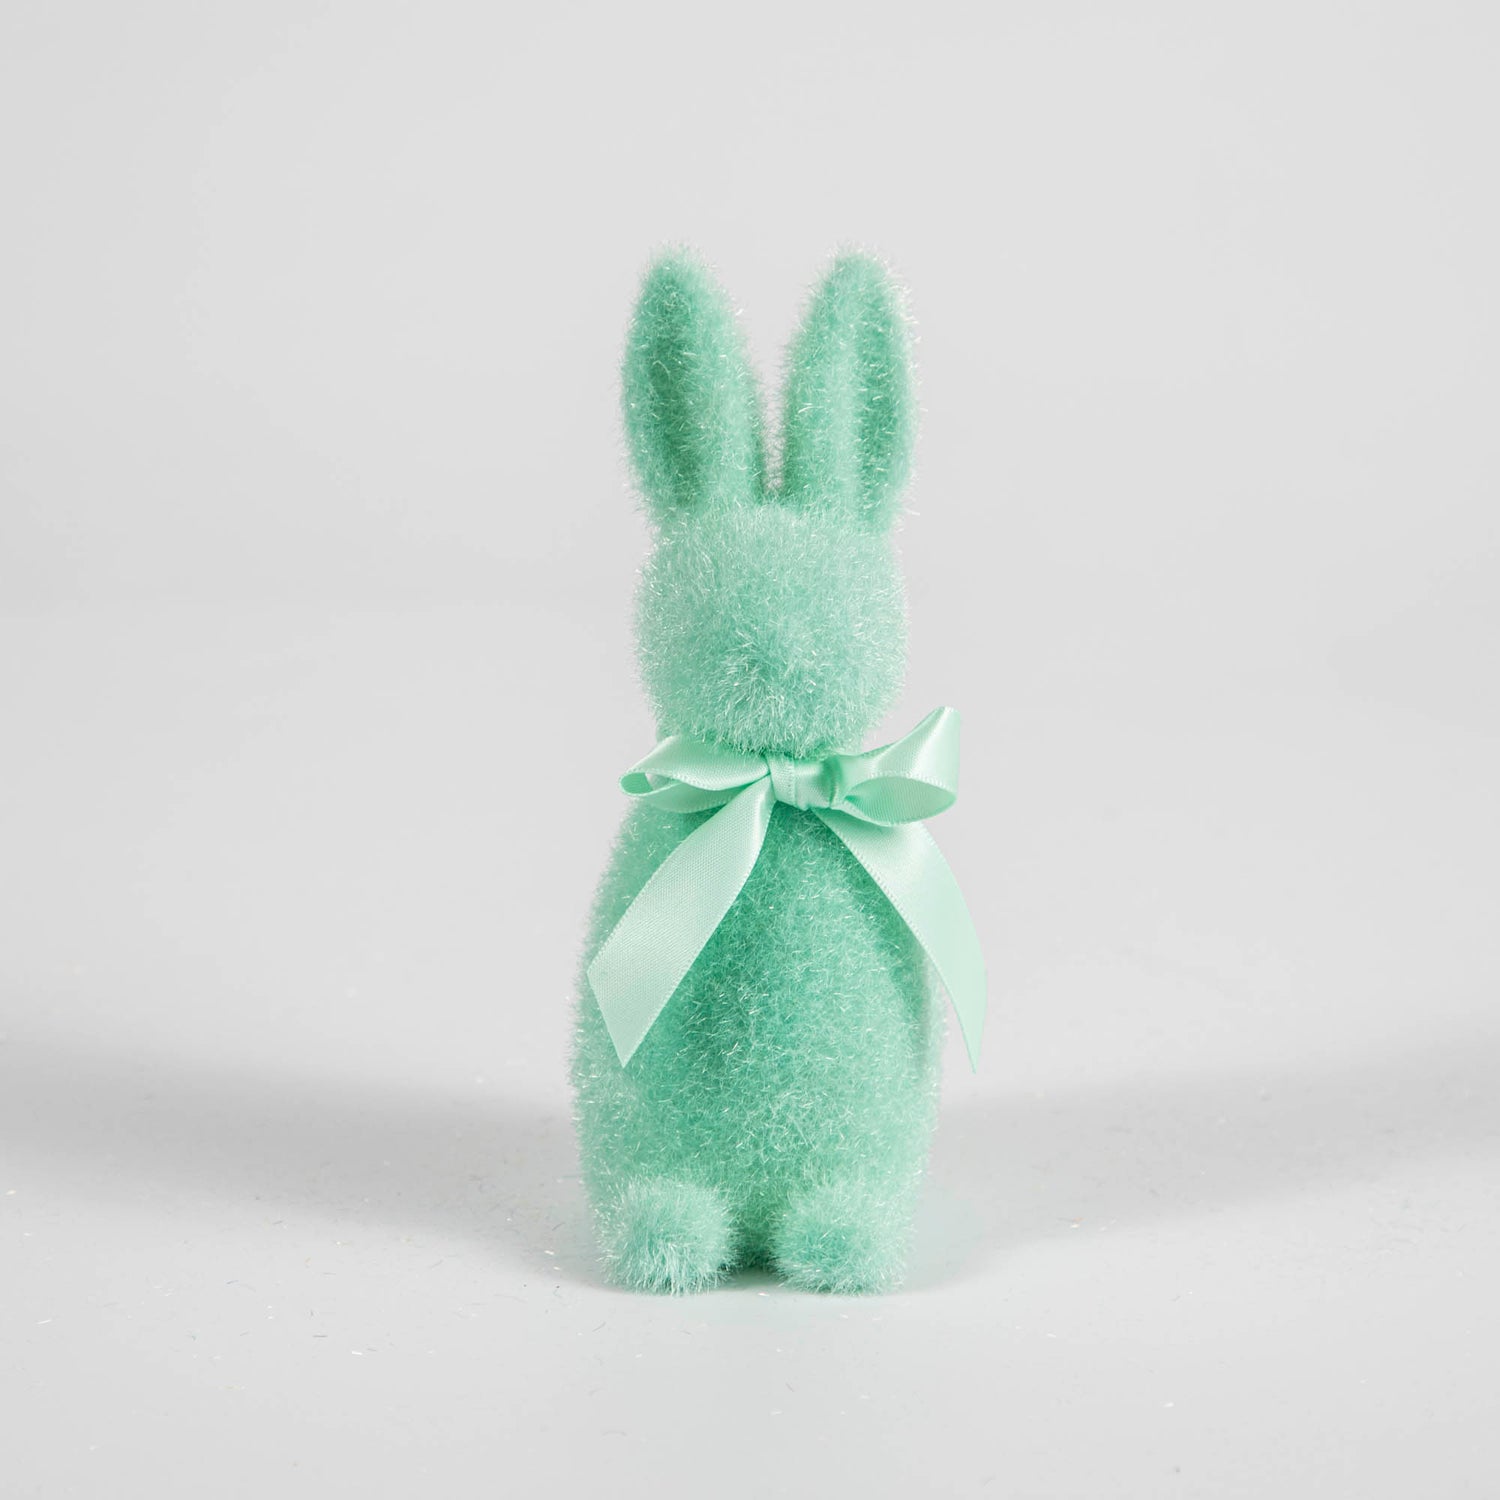 A Small Flocked Pastel Button Nose Bunny from Glitterville with a bow on a white backround.